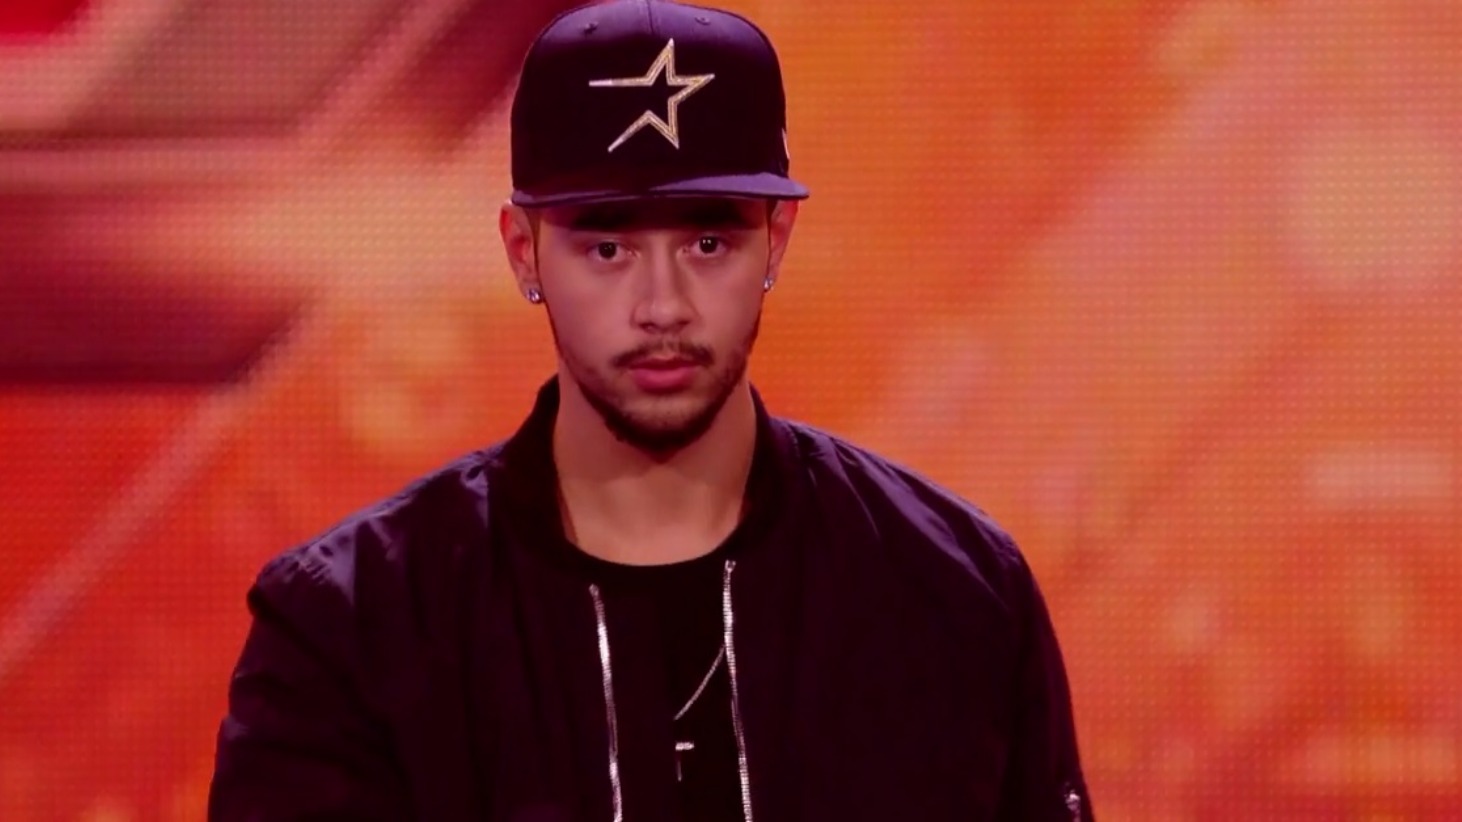 Mason Noise kicked off X Factor after clash with Simon Cowell | ITV News